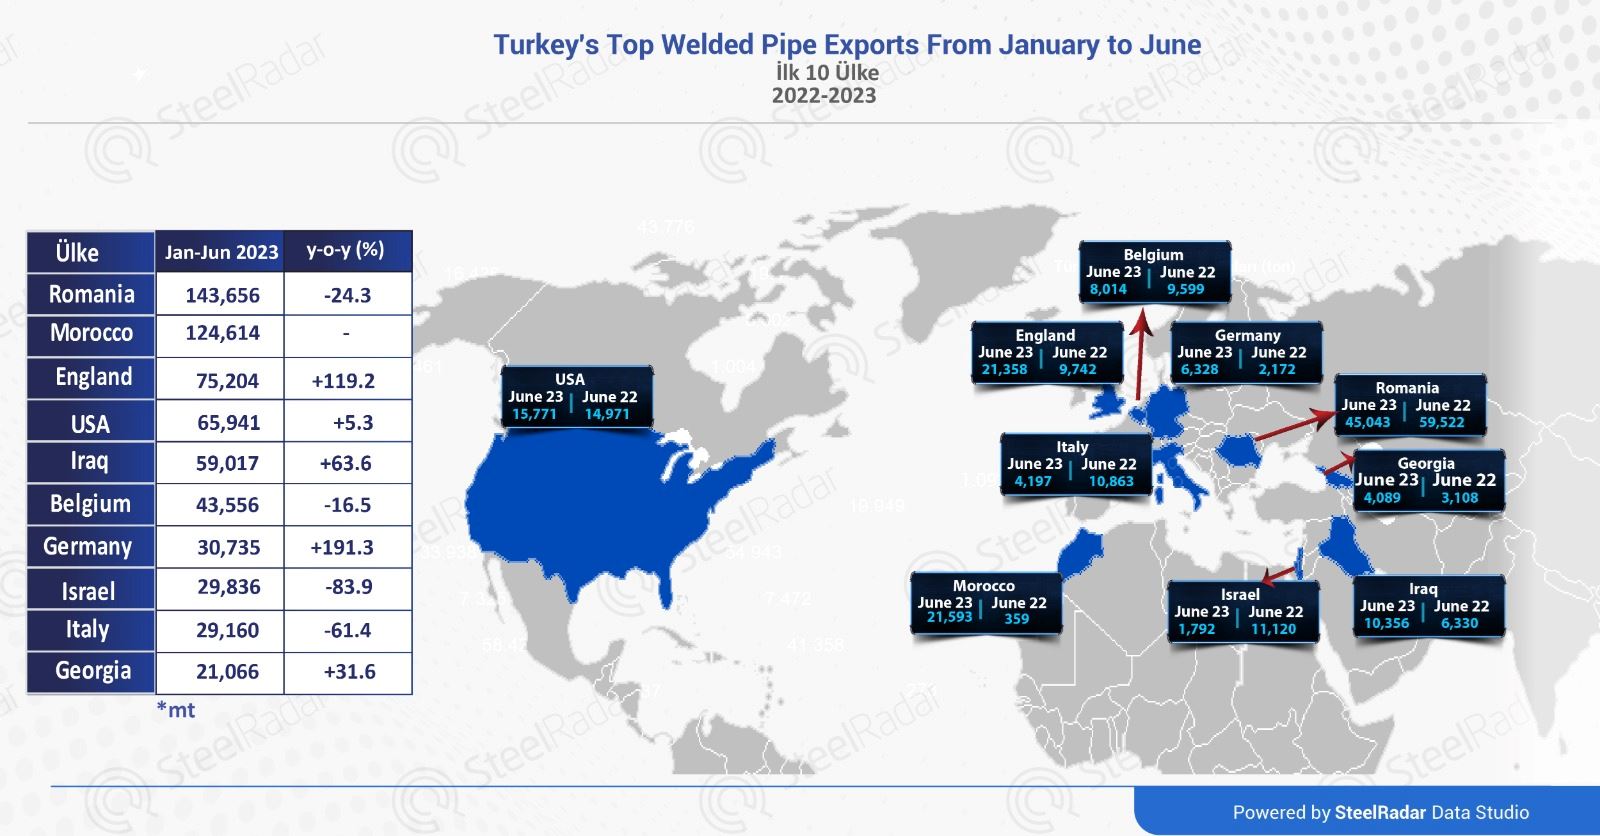 Romania ranks first in Turkey's welded pipe exports